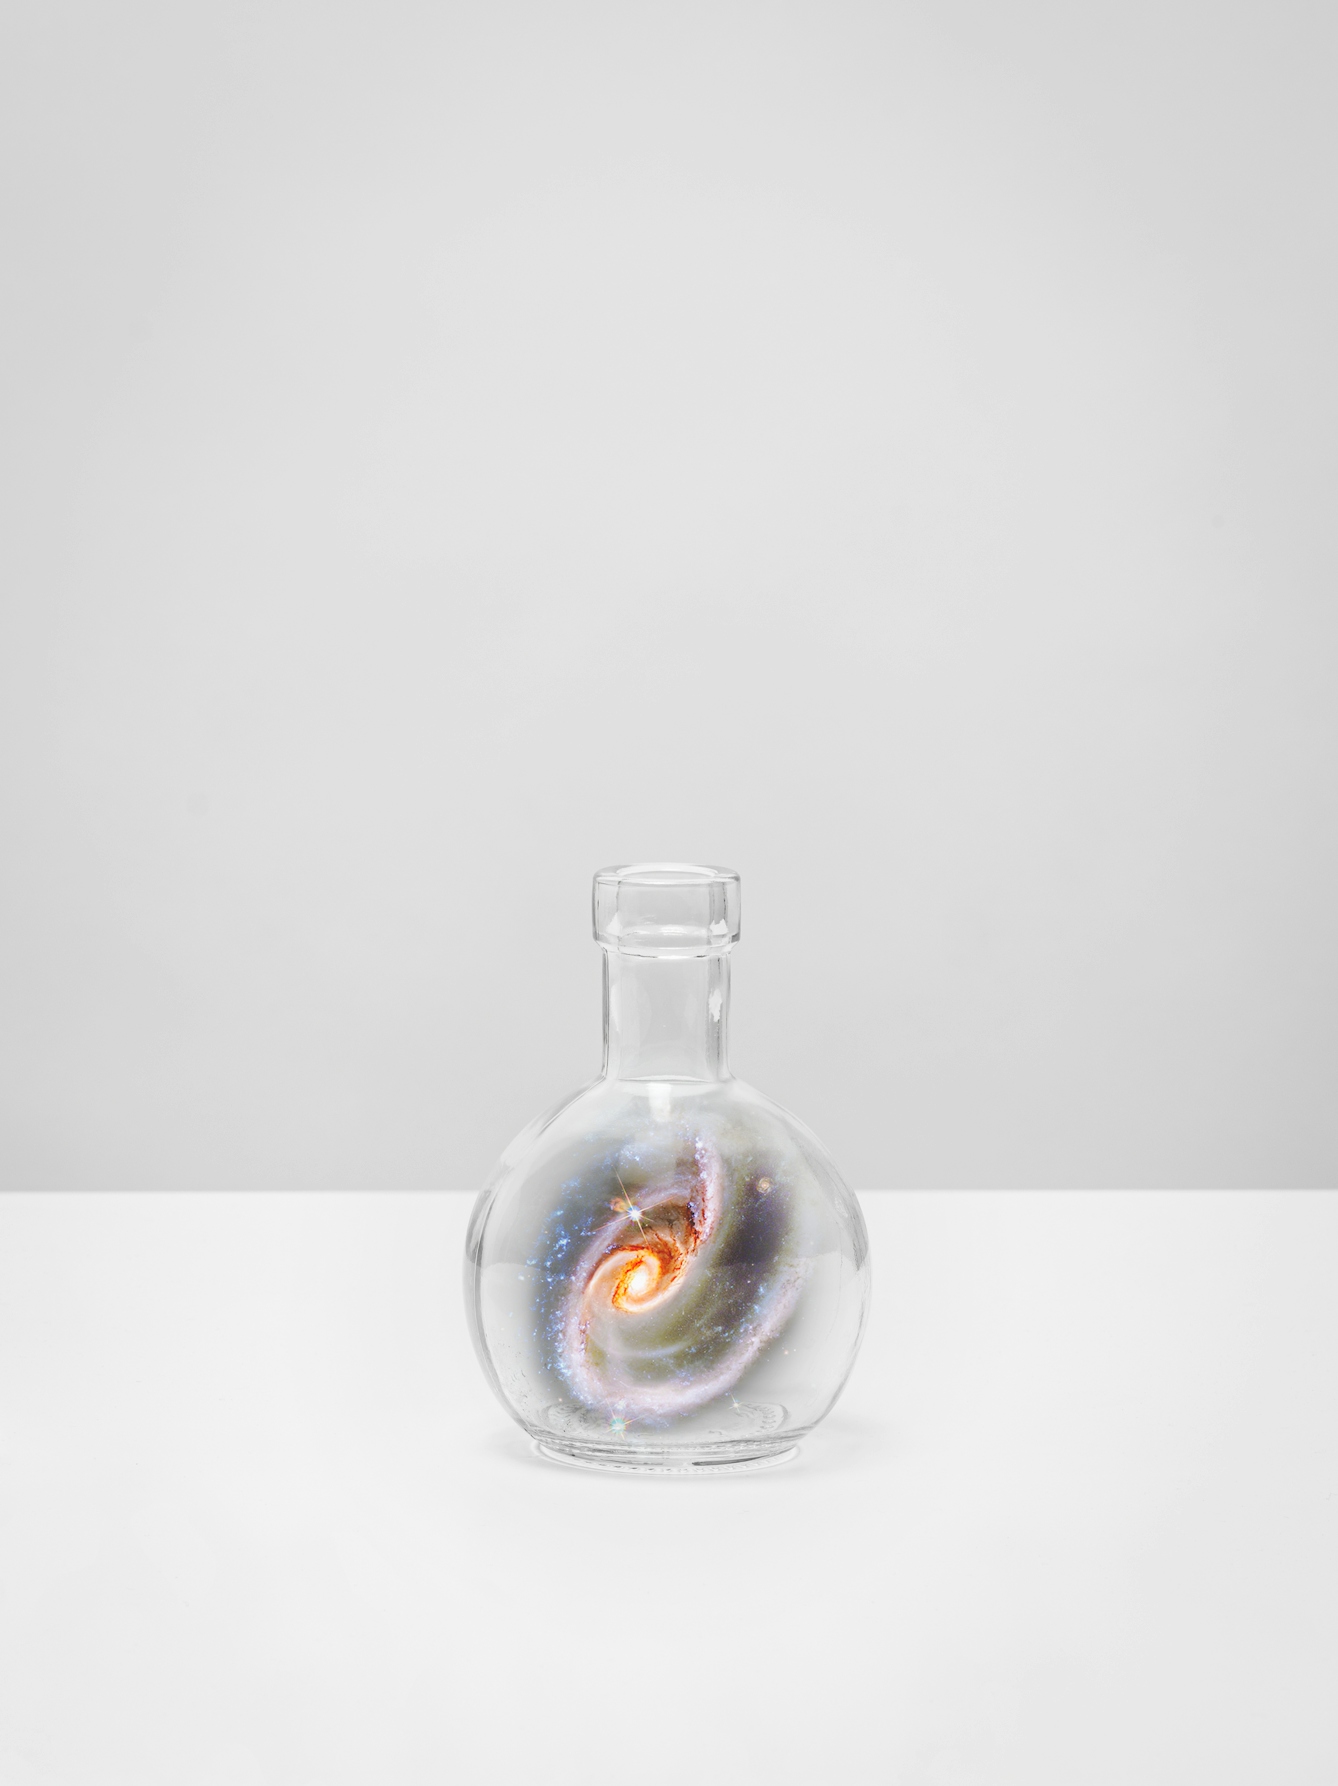 Photograph of a single vertical bar, set on a white tabletop against a plain grey background. A glass flask rests on the tabletop. Swirling inside each flask is a scene of the galaxy, revealing colourful constellations, swirling stars and gaseous nebula. 